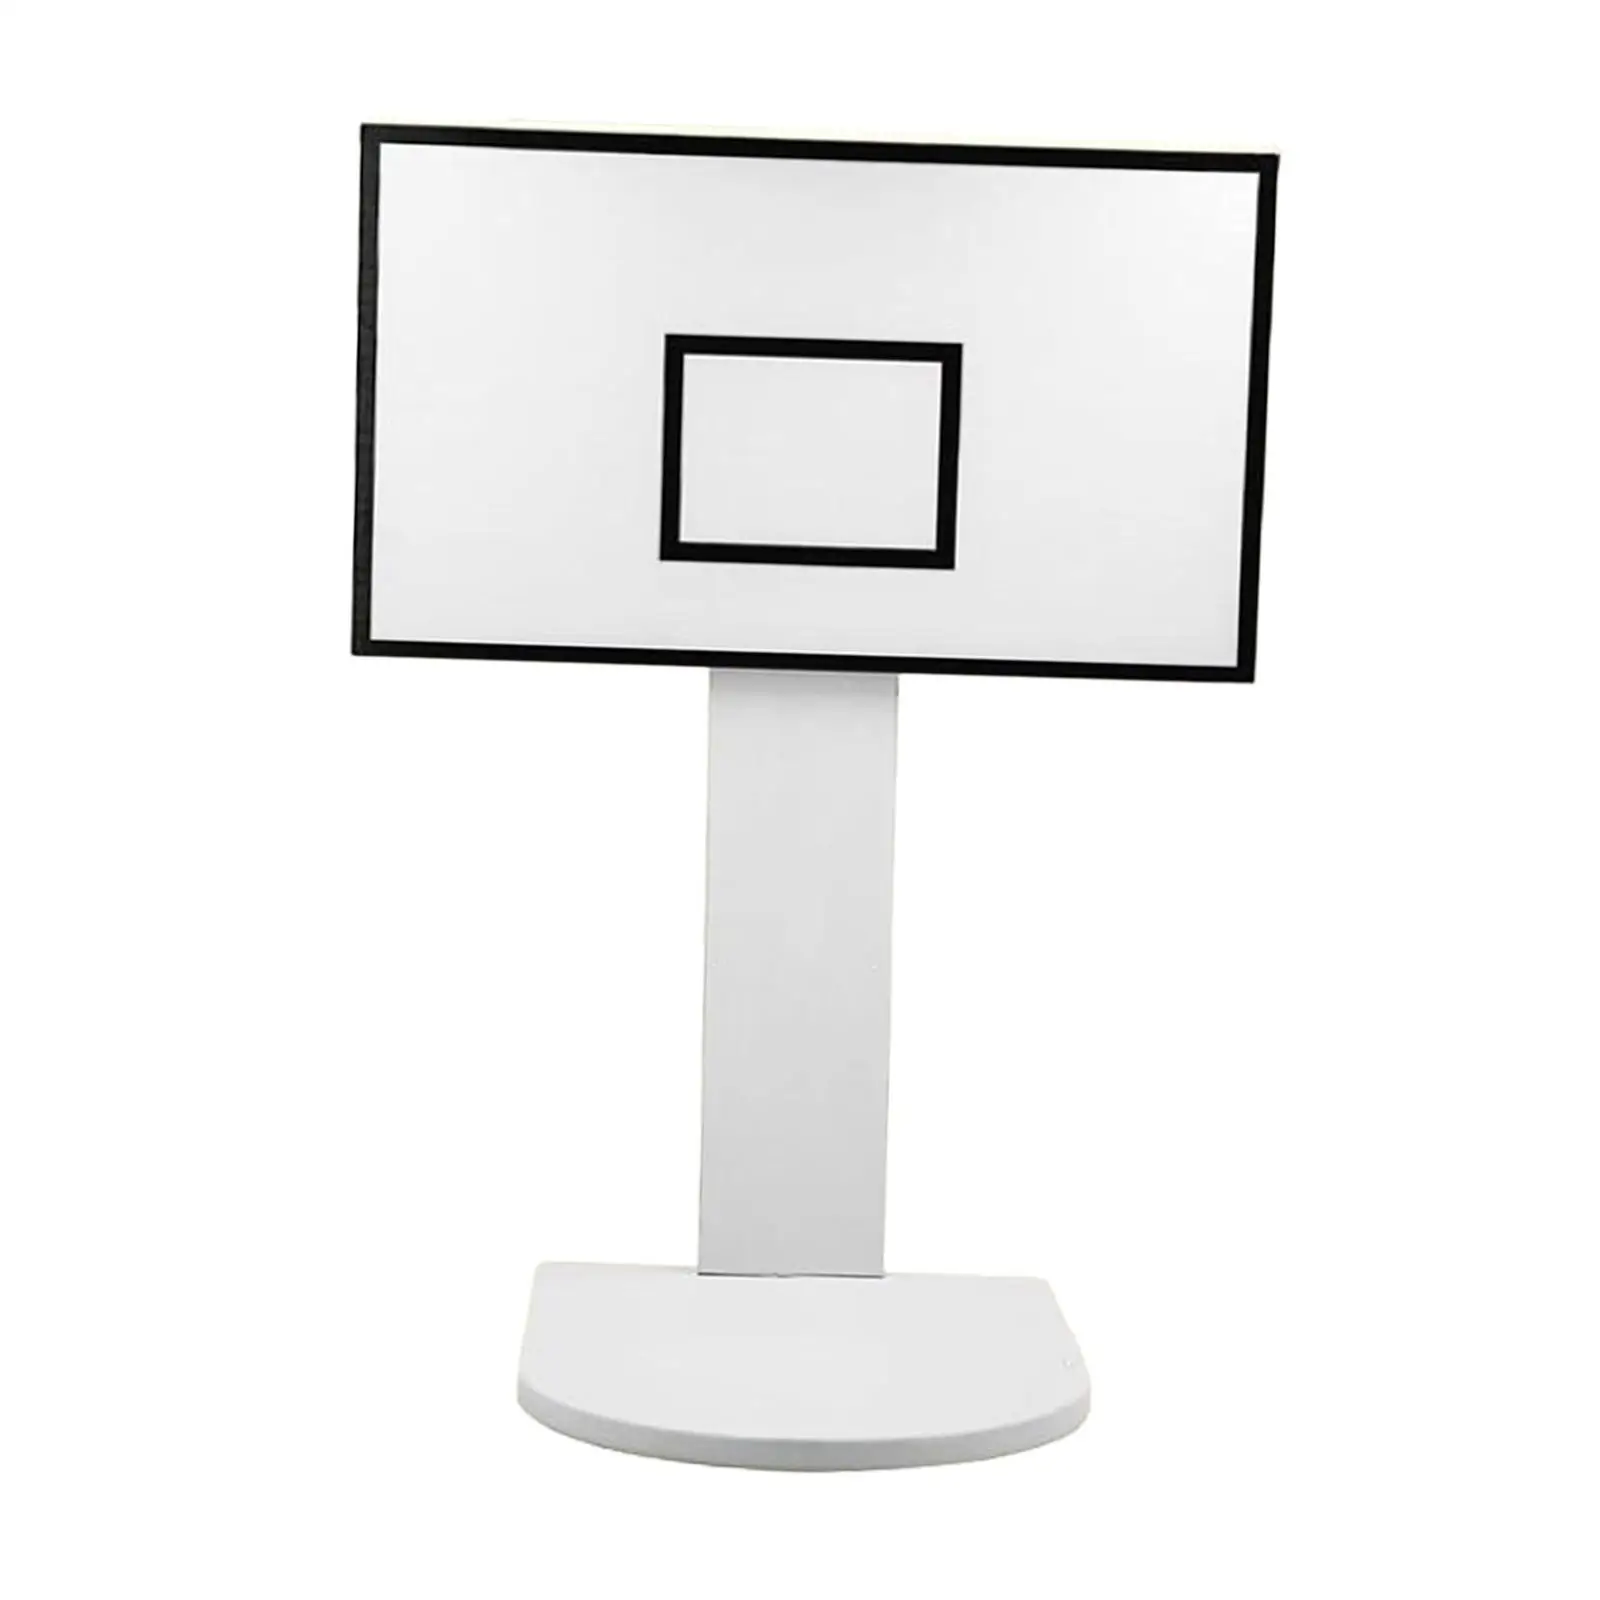 Basketball Rack without Rubbish Bin Garbage Can Basketball Frame Basketball Hoop for Living Room Office Home Kitchen Bedroom